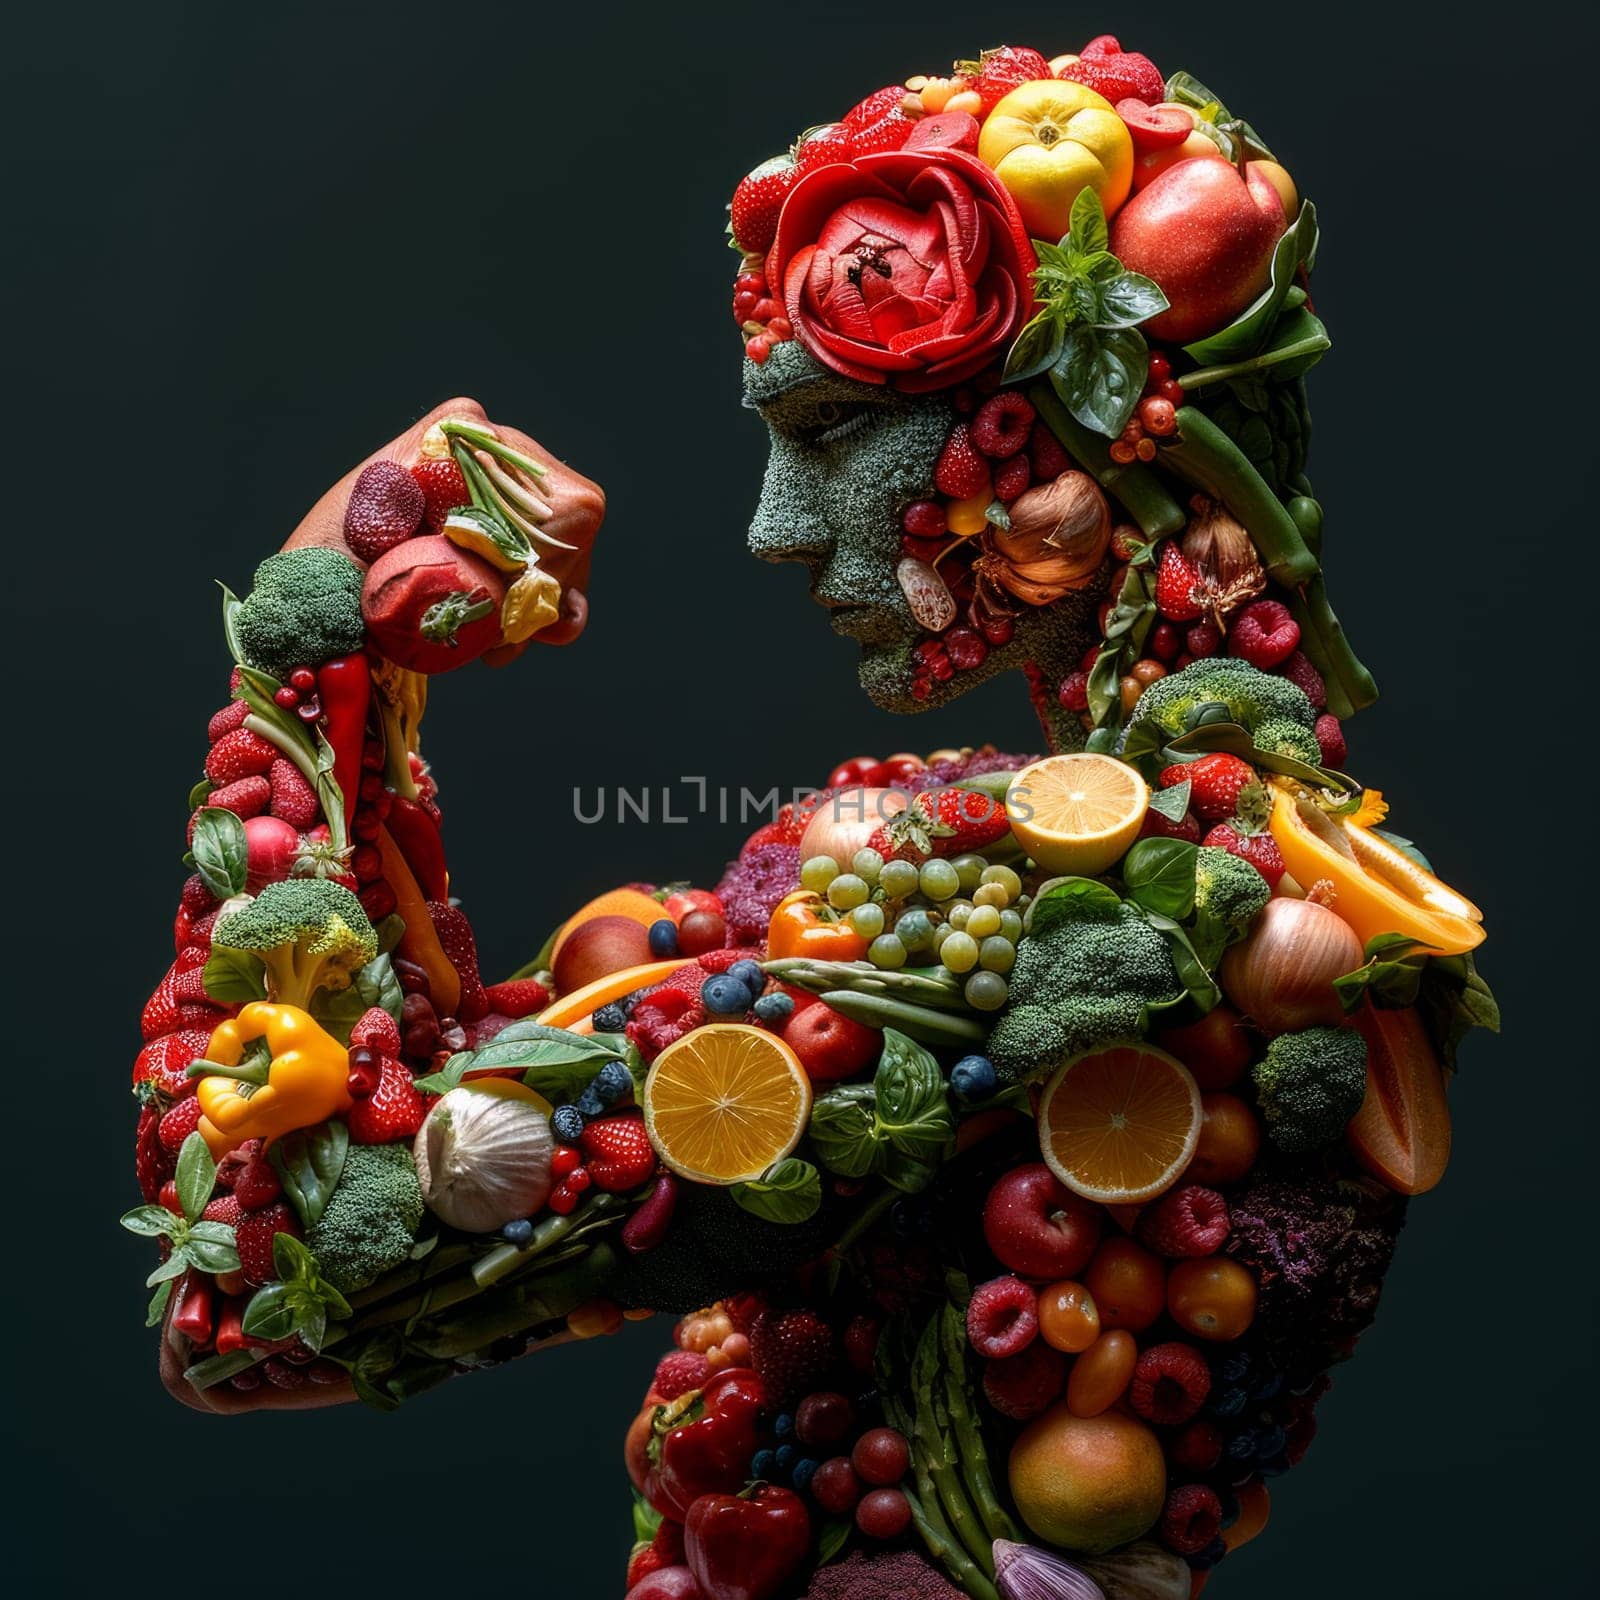 Illustration of a strong man made out of healthy fruits and vegetables.